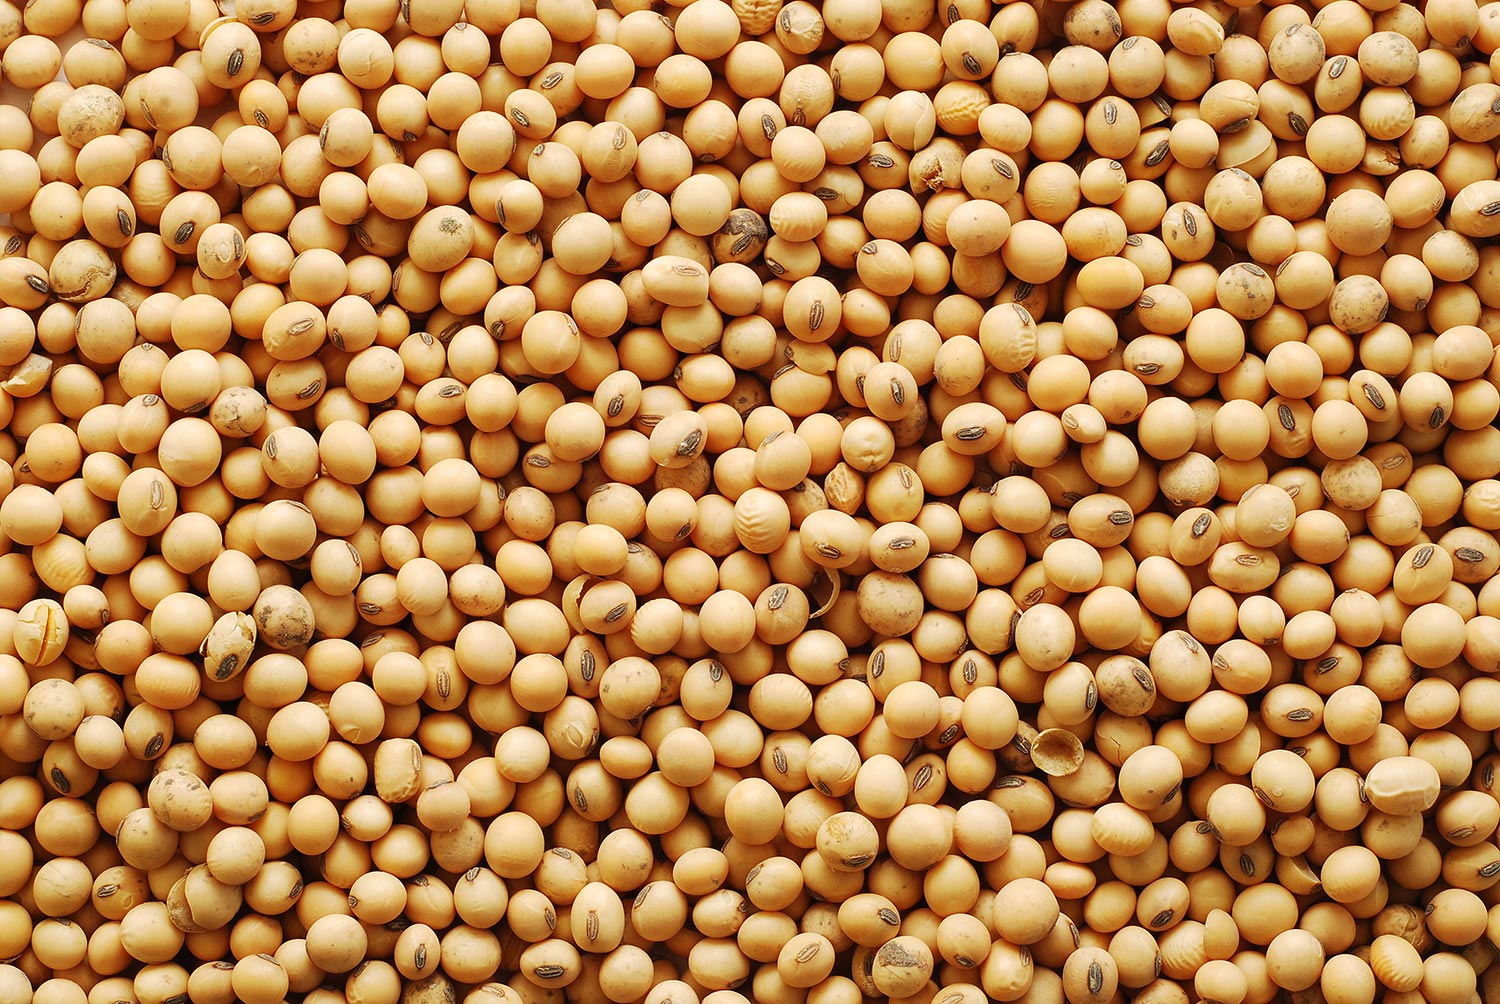 Piles of soy beans